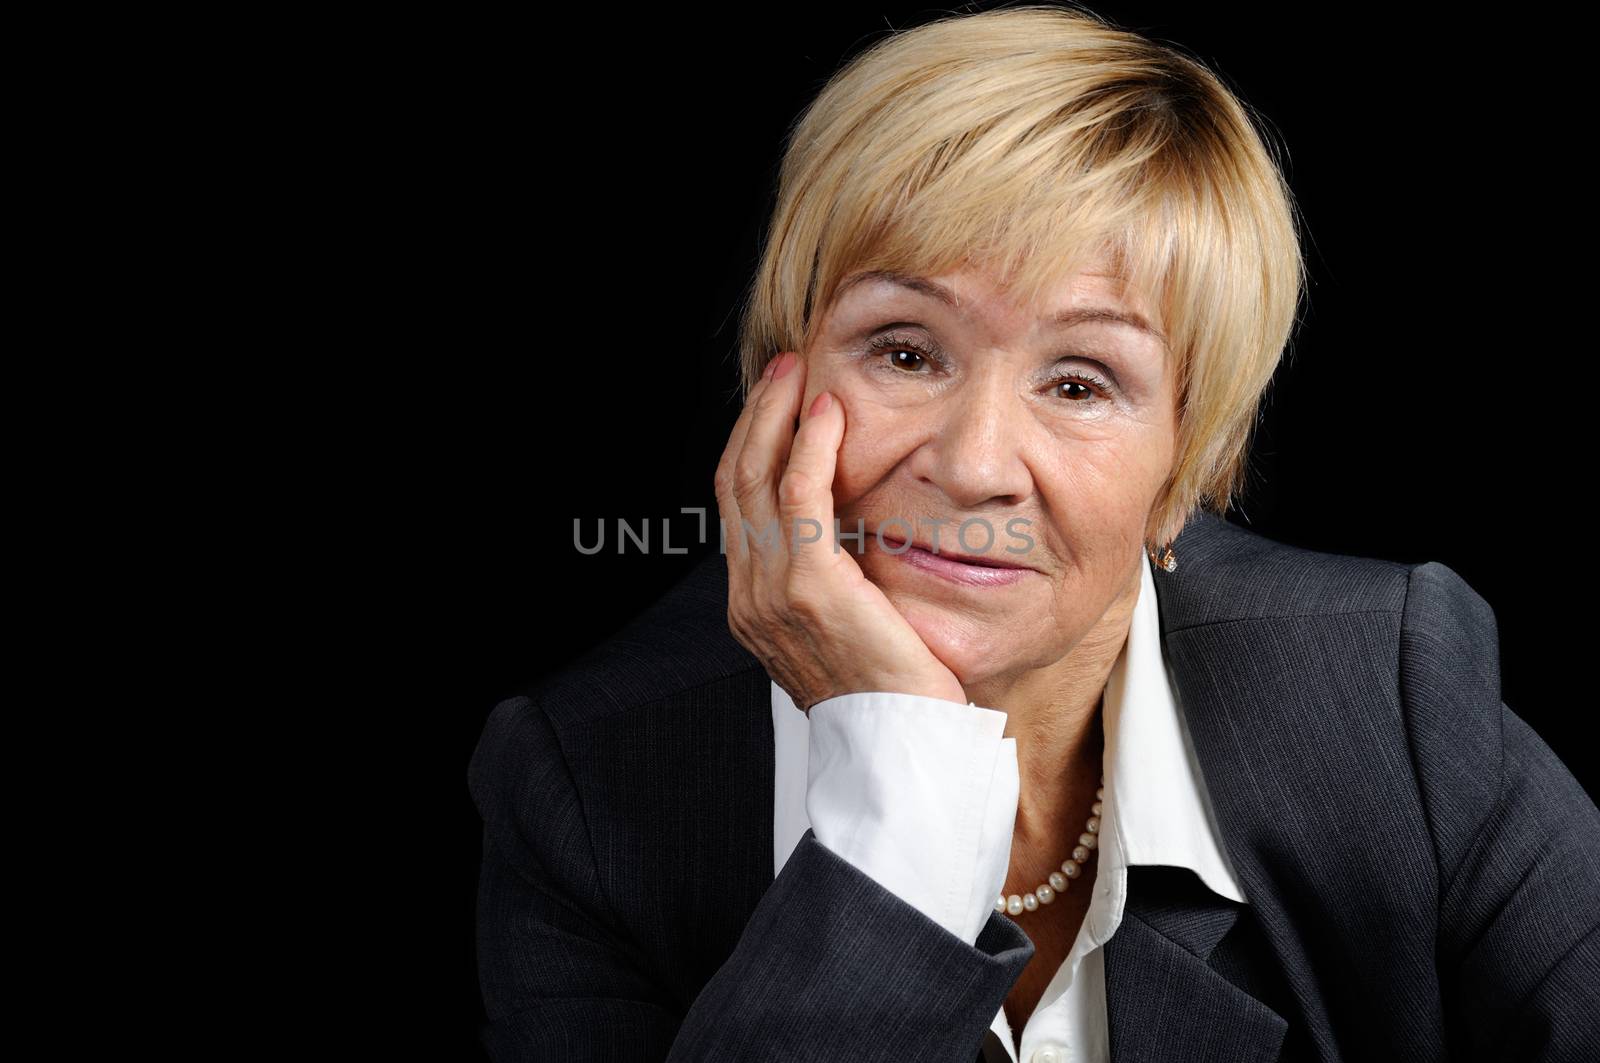 Portrait of an elderly woman (70+) in a business suit against a dark background close-up